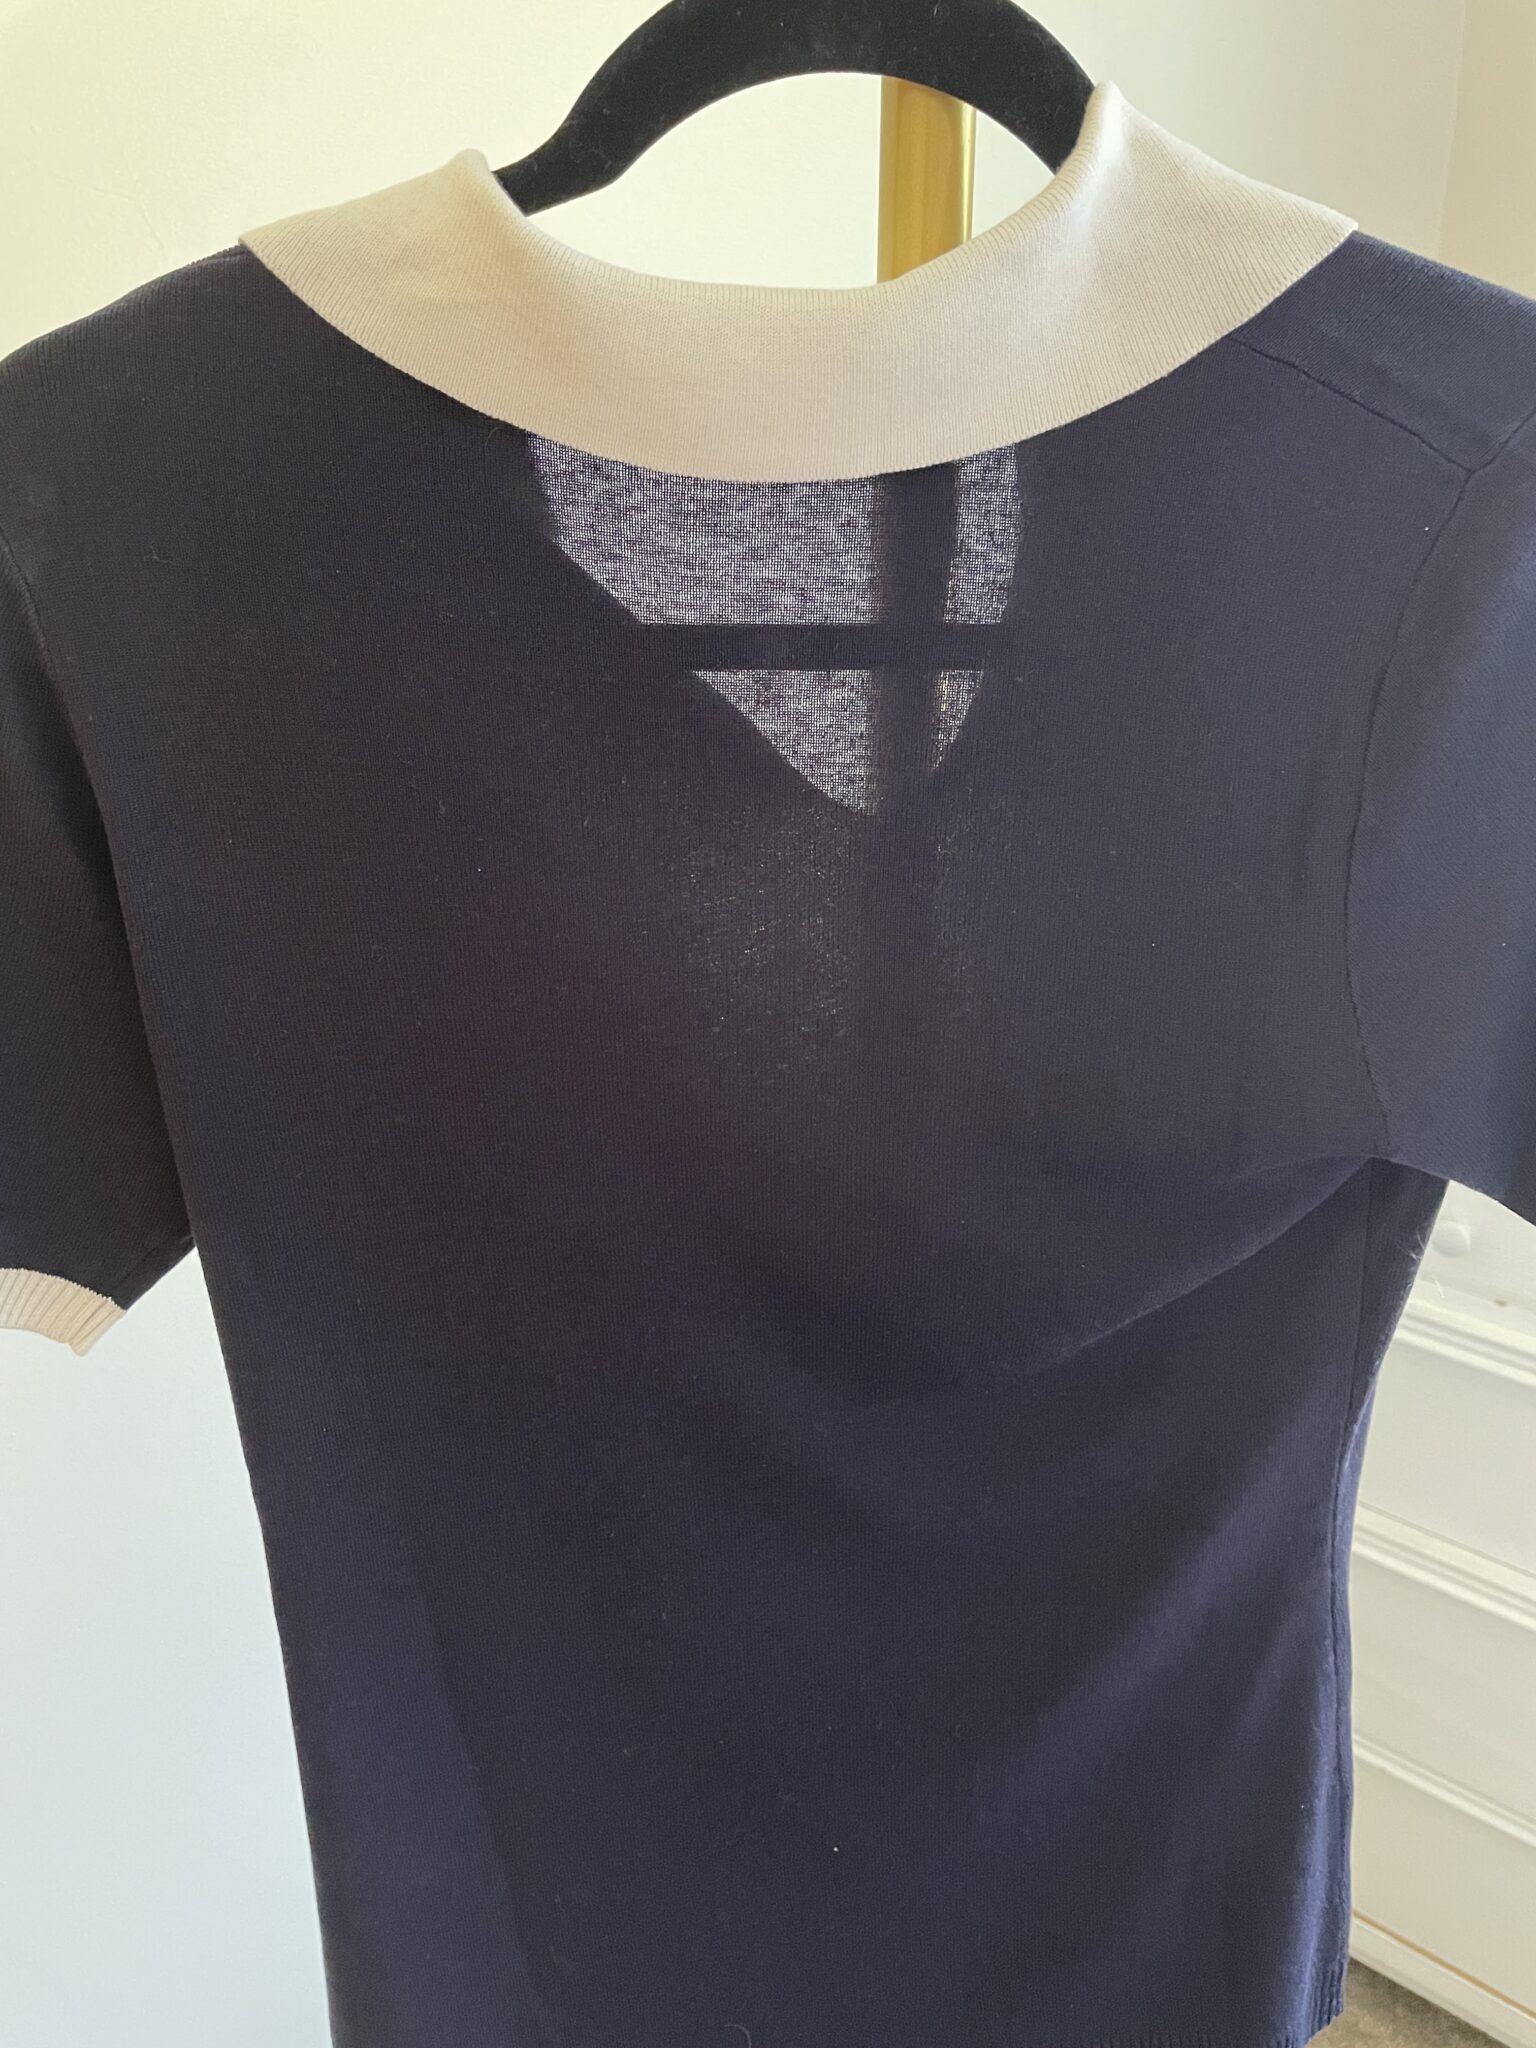 Review of LILYSILK Knit Polo